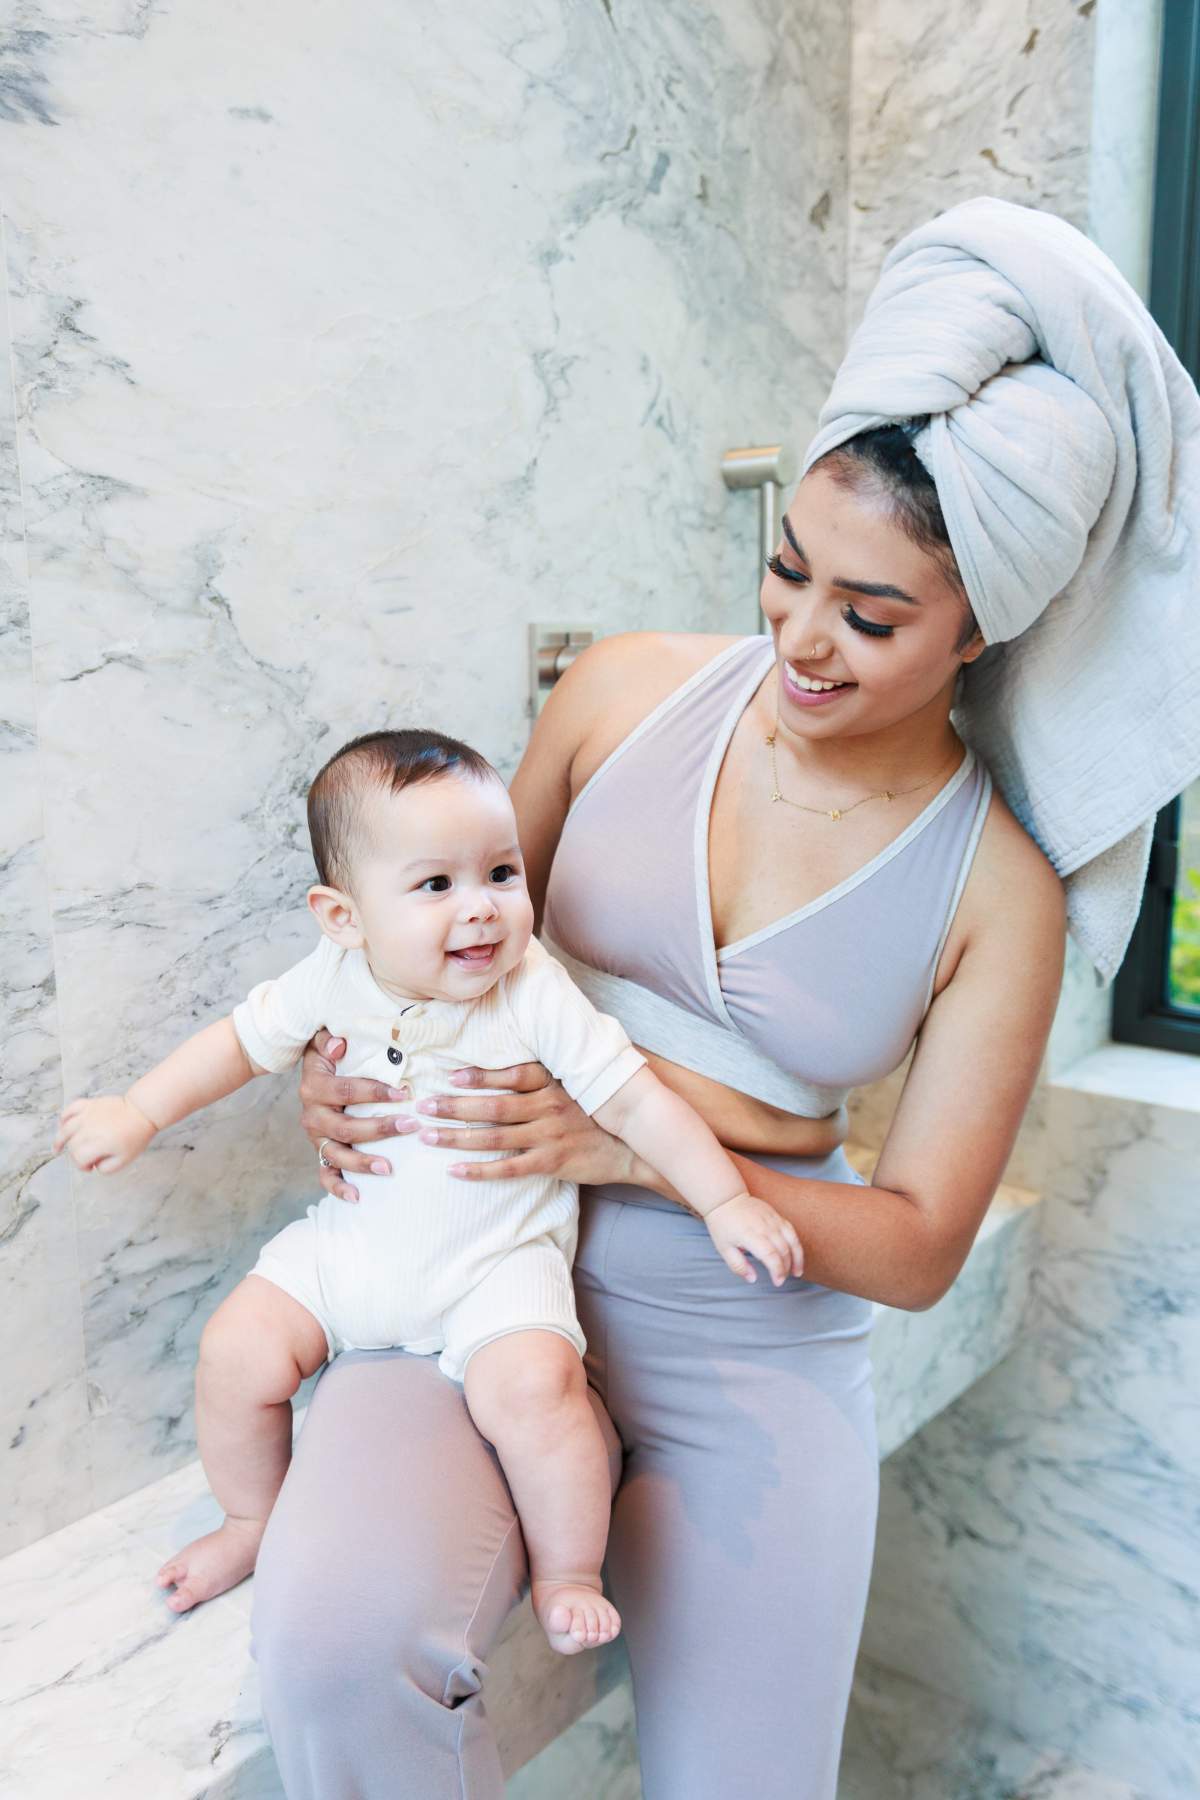 Bodycare Creations - Being a mother means being completely and totally  overwhelmed (in the best possible way) by love, joy, responsibility, and  selflessness. Bodycare Nursing-Feeding bra's make sure to make feeding your